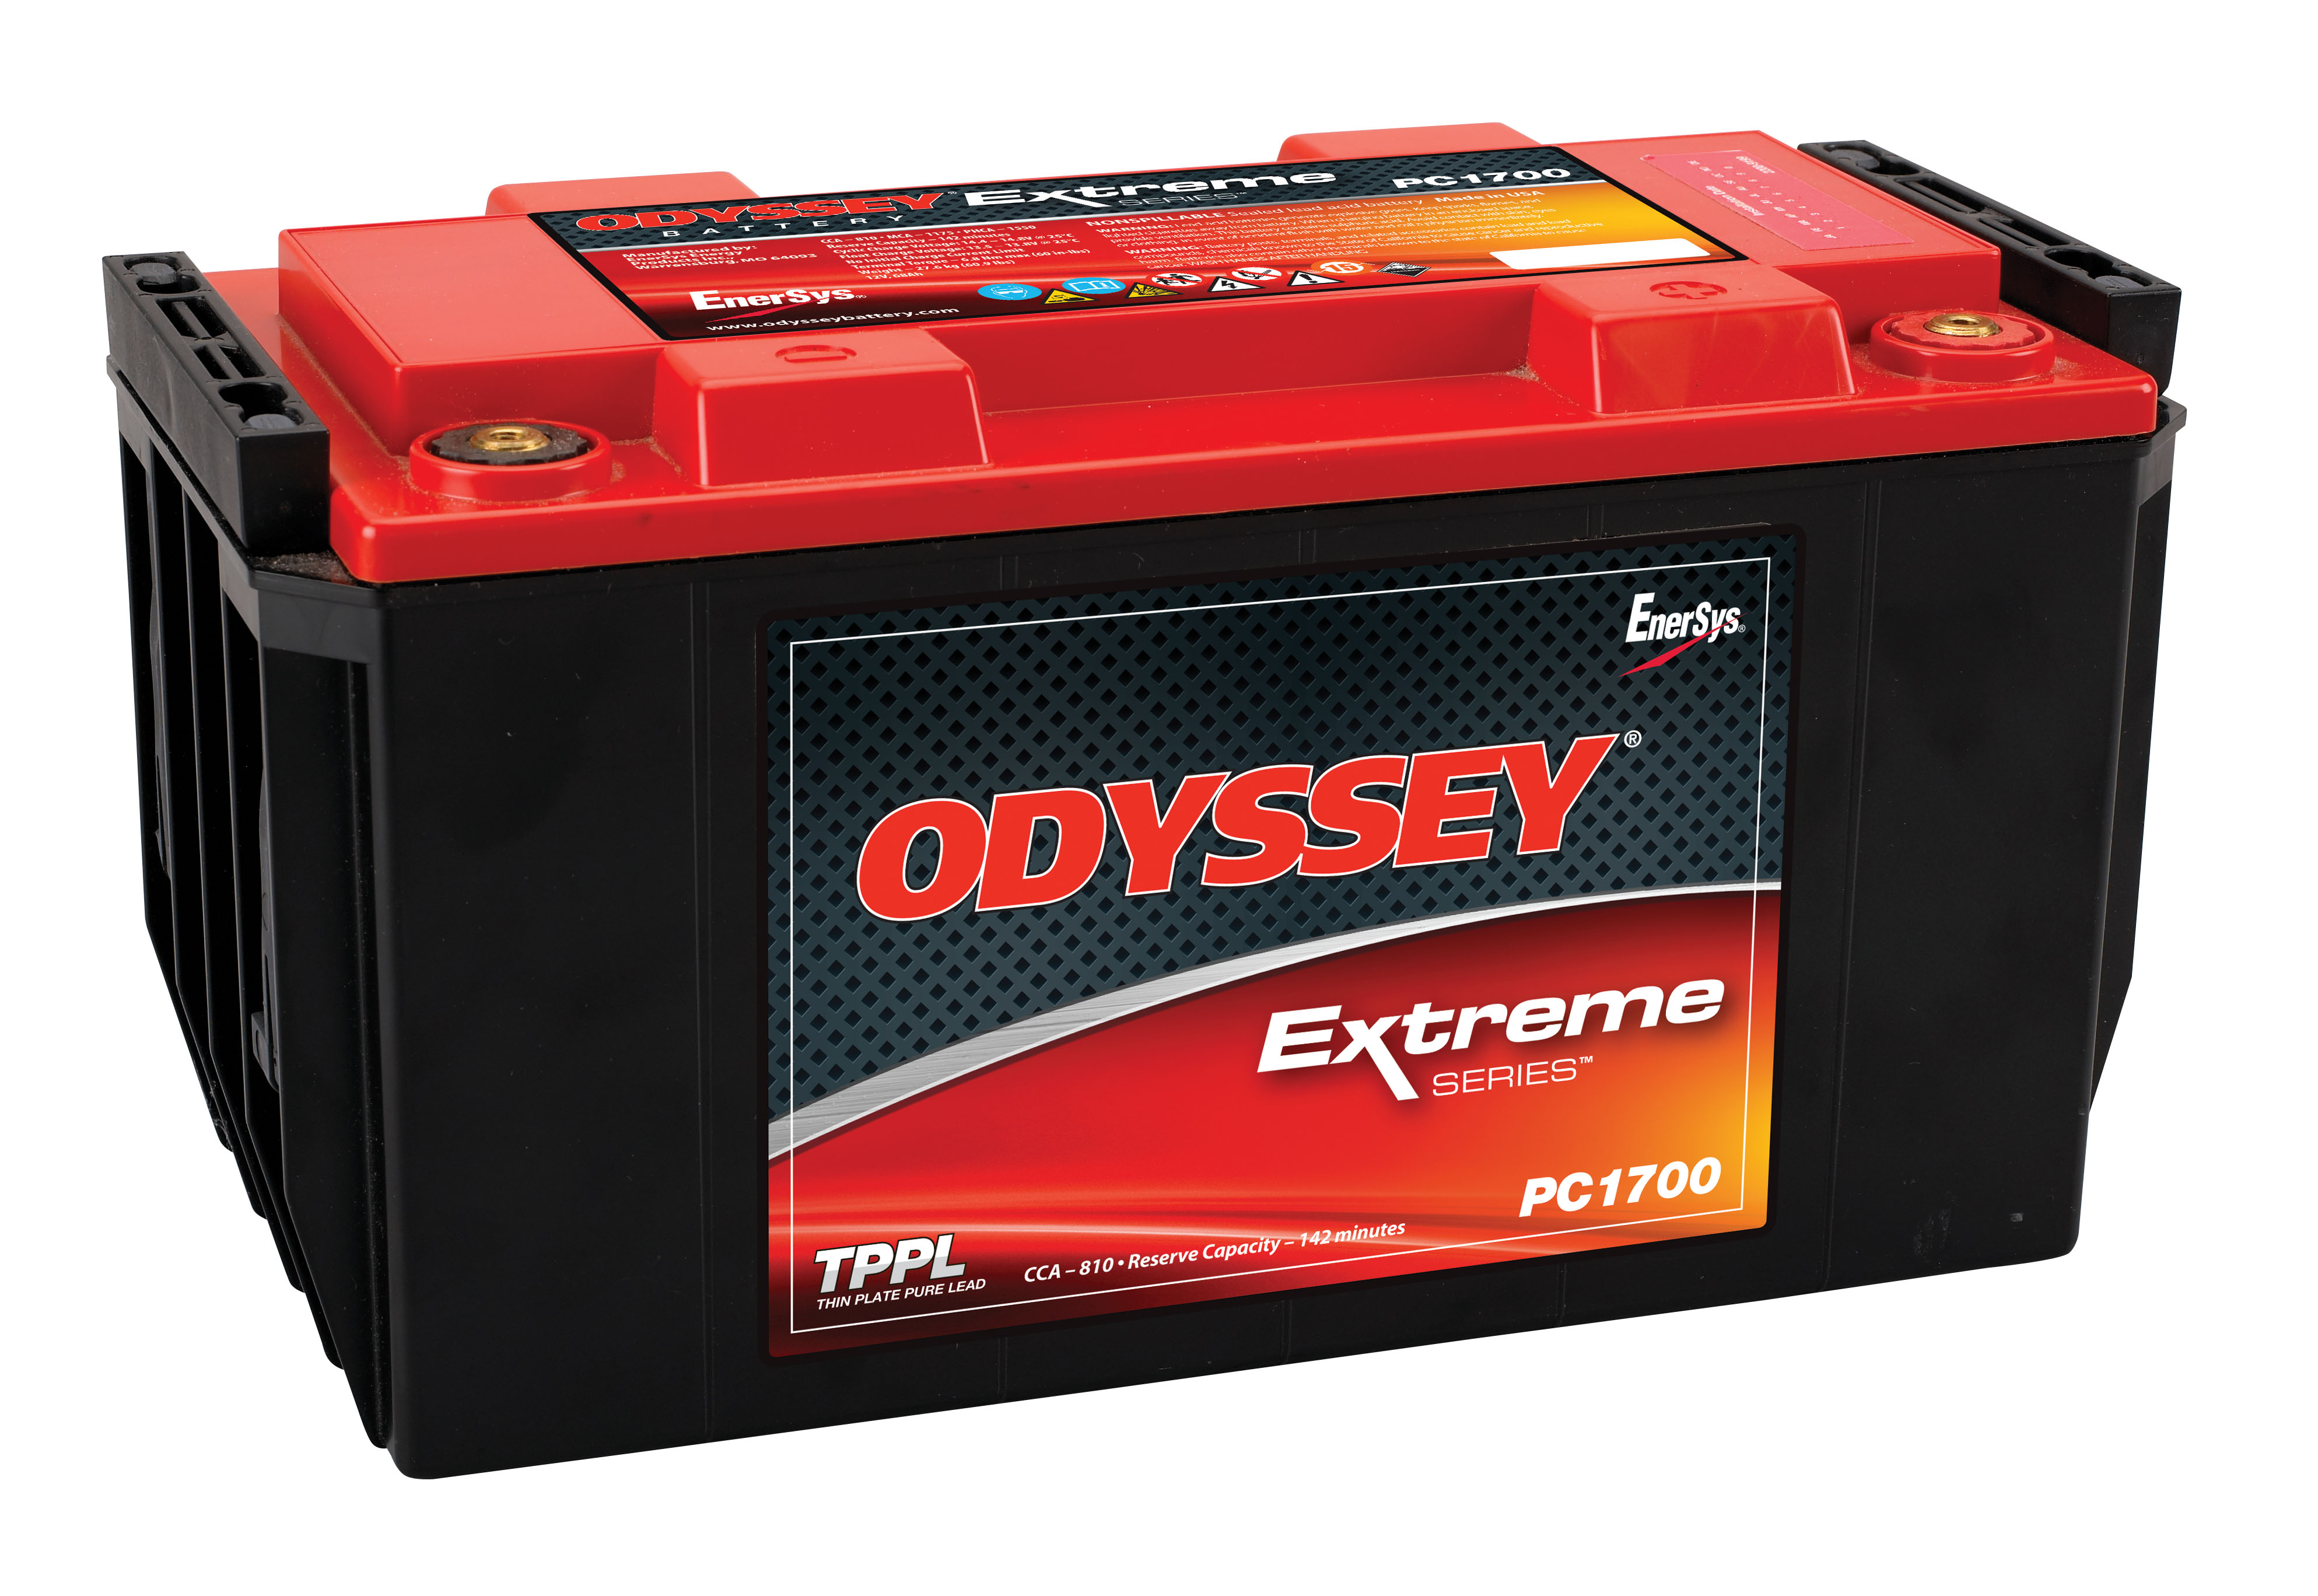 Odyssey Extreme PC1700 Product Picture.jpg